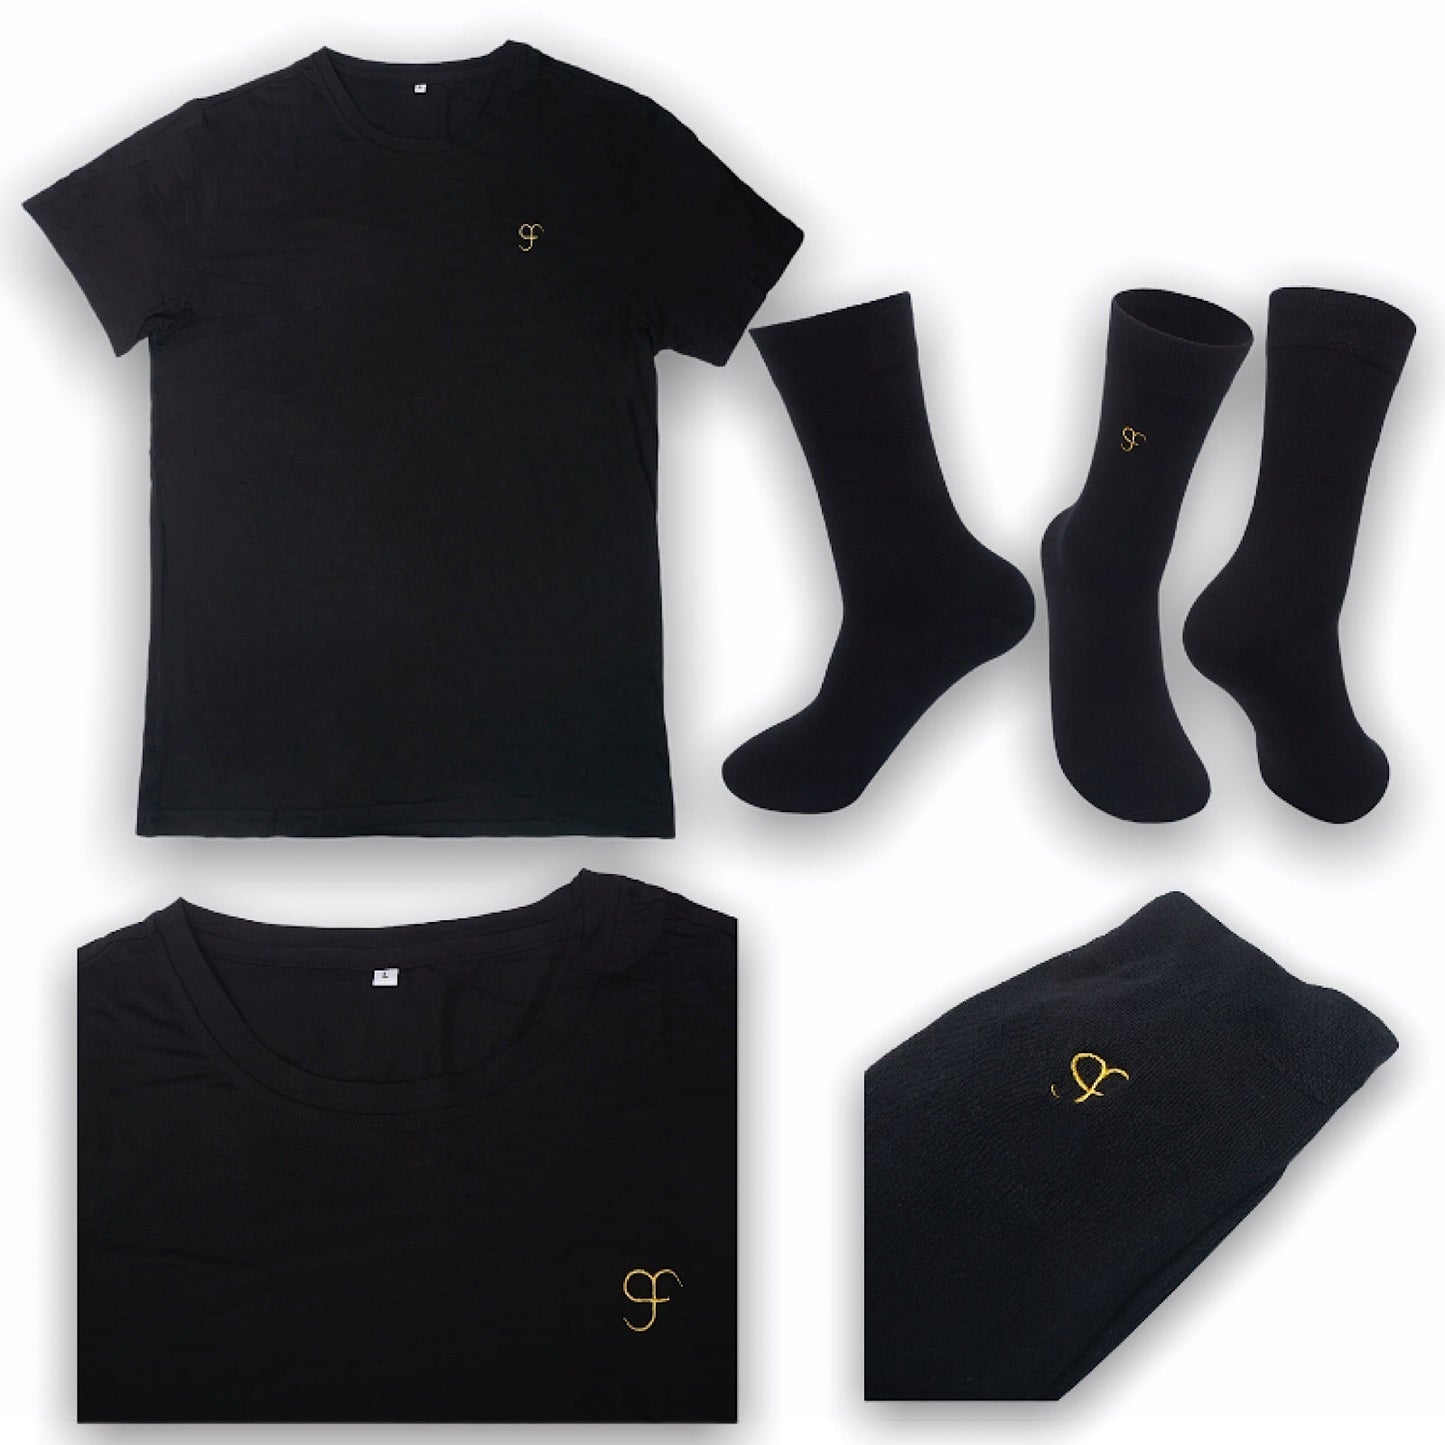 Extra Large size Luxury Bamboo T-Shirt & Bamboo Socks Gift Box Set for Men & Women in a Handcrafted Magnetic Close Keepsake Box Black